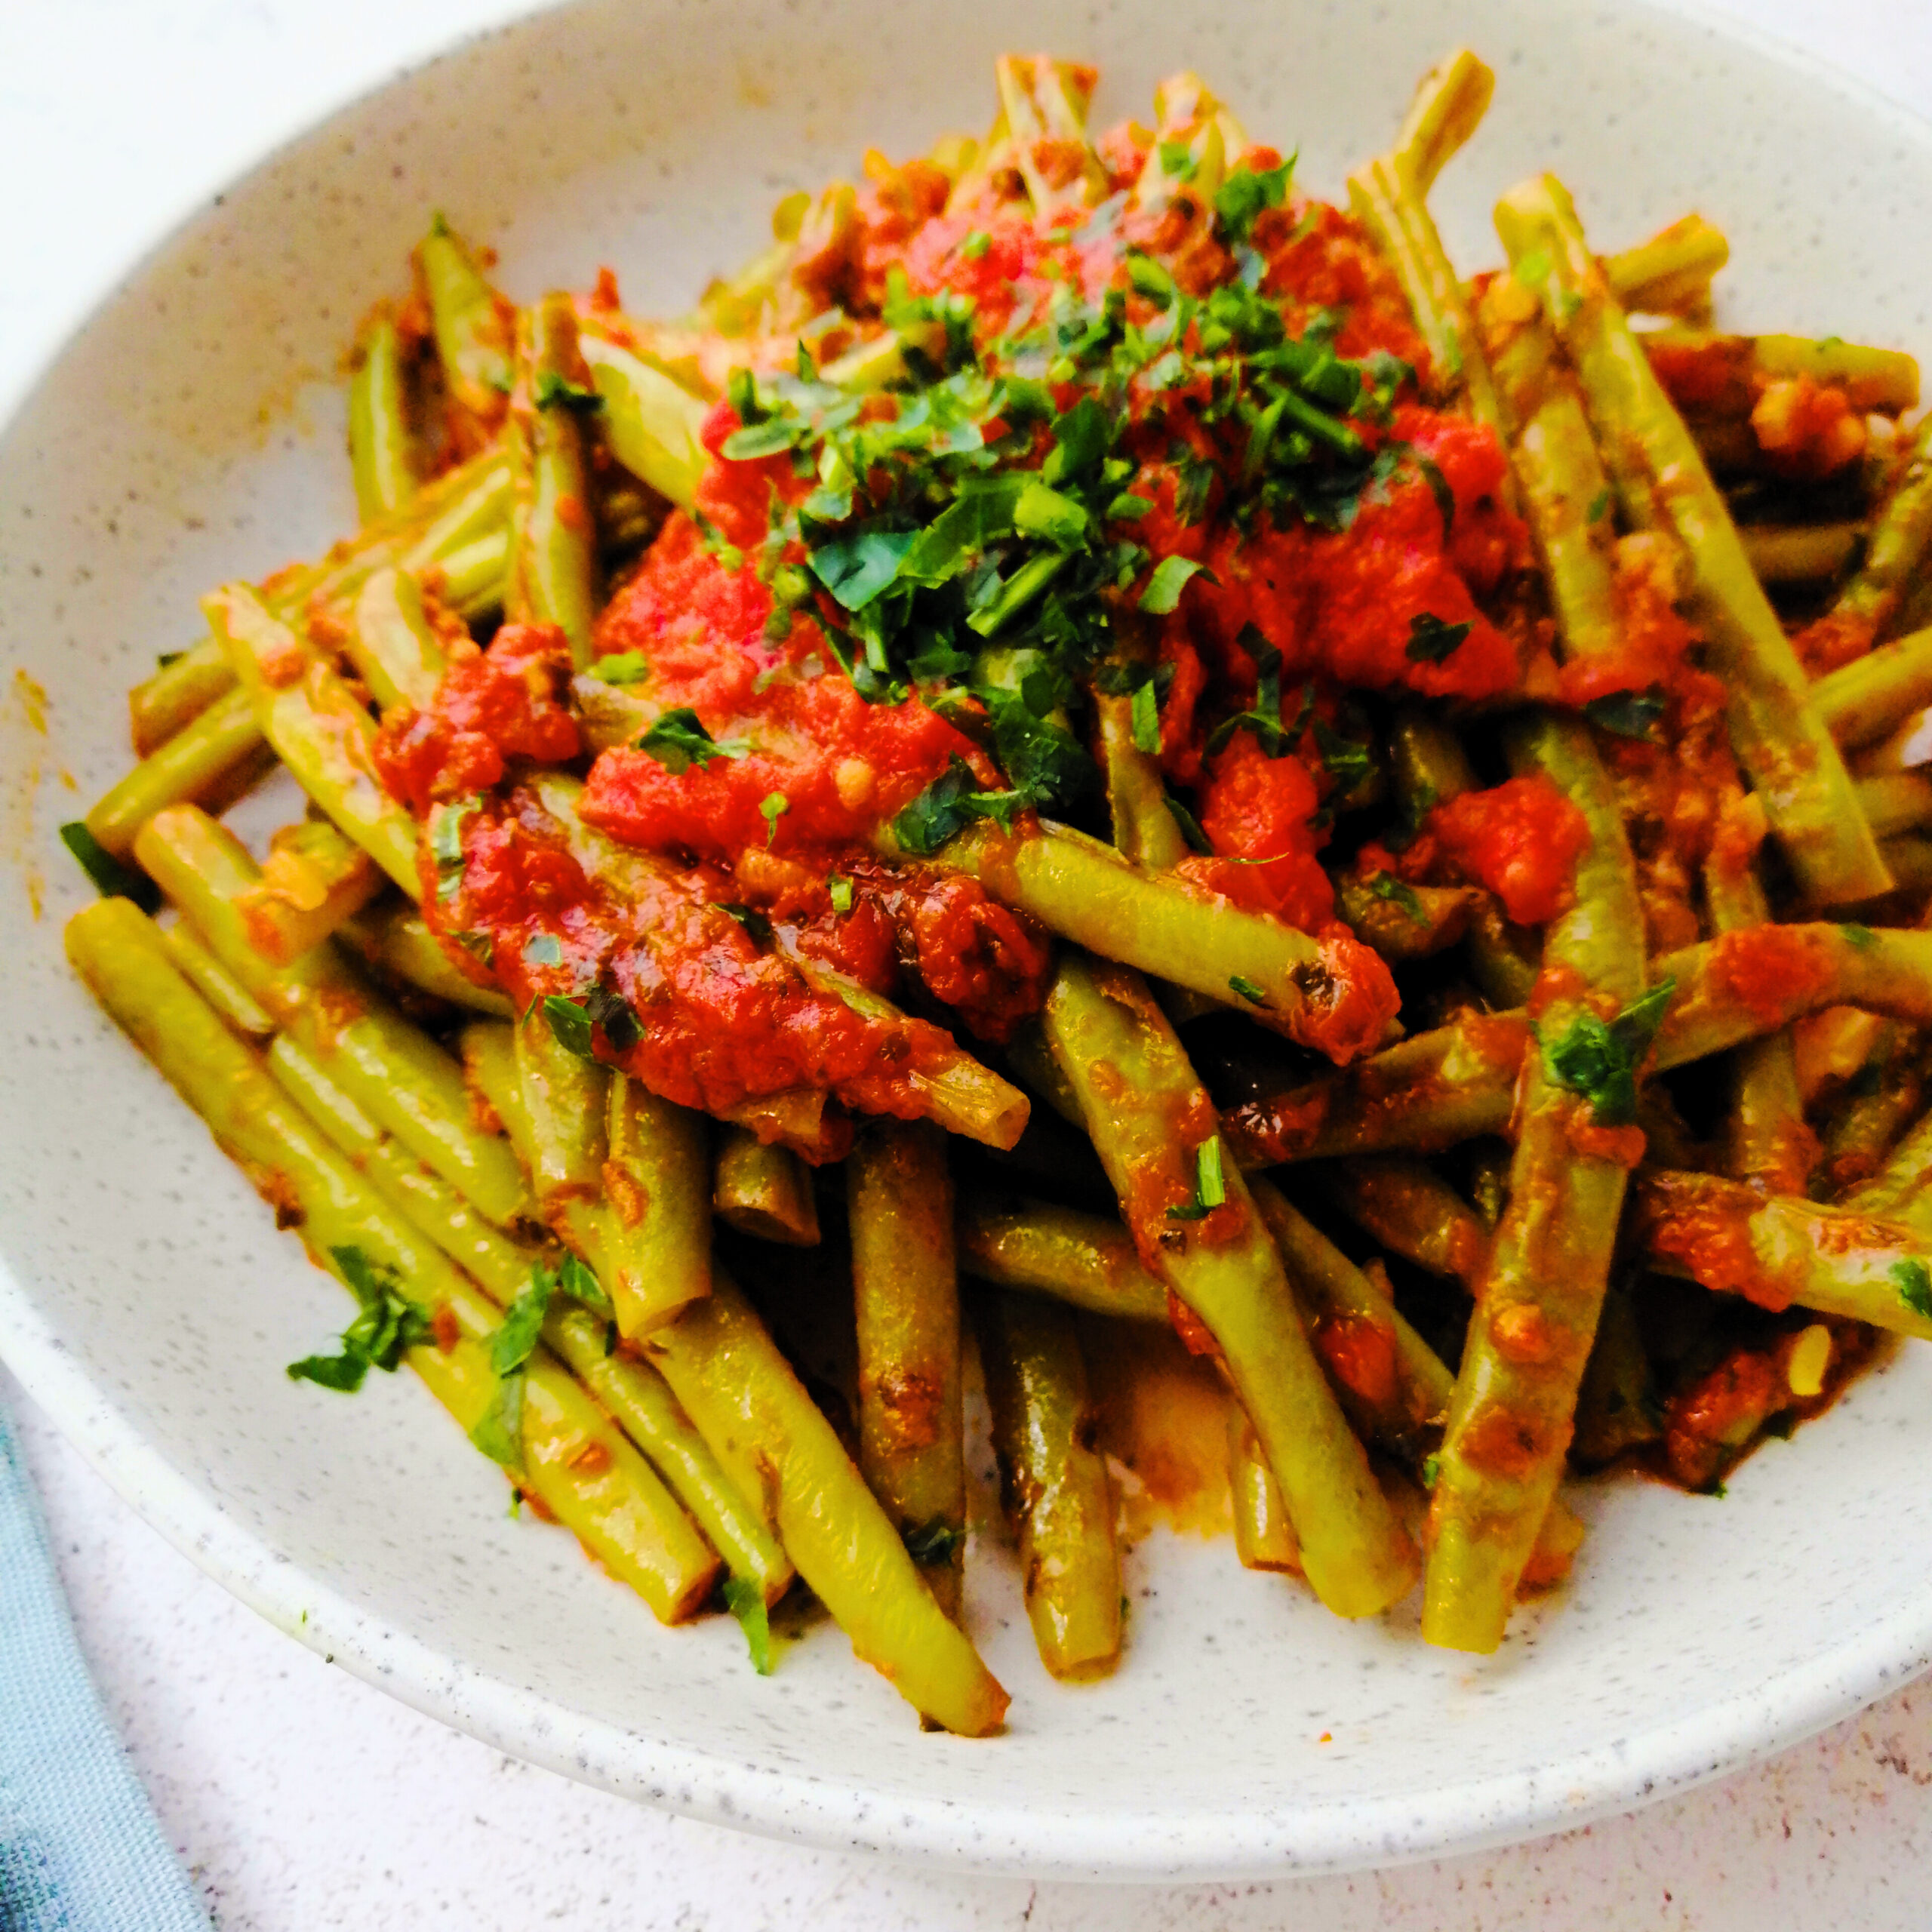 Bowl of green beans cooked in s a tomato sauce with sprinkled chopped parsley